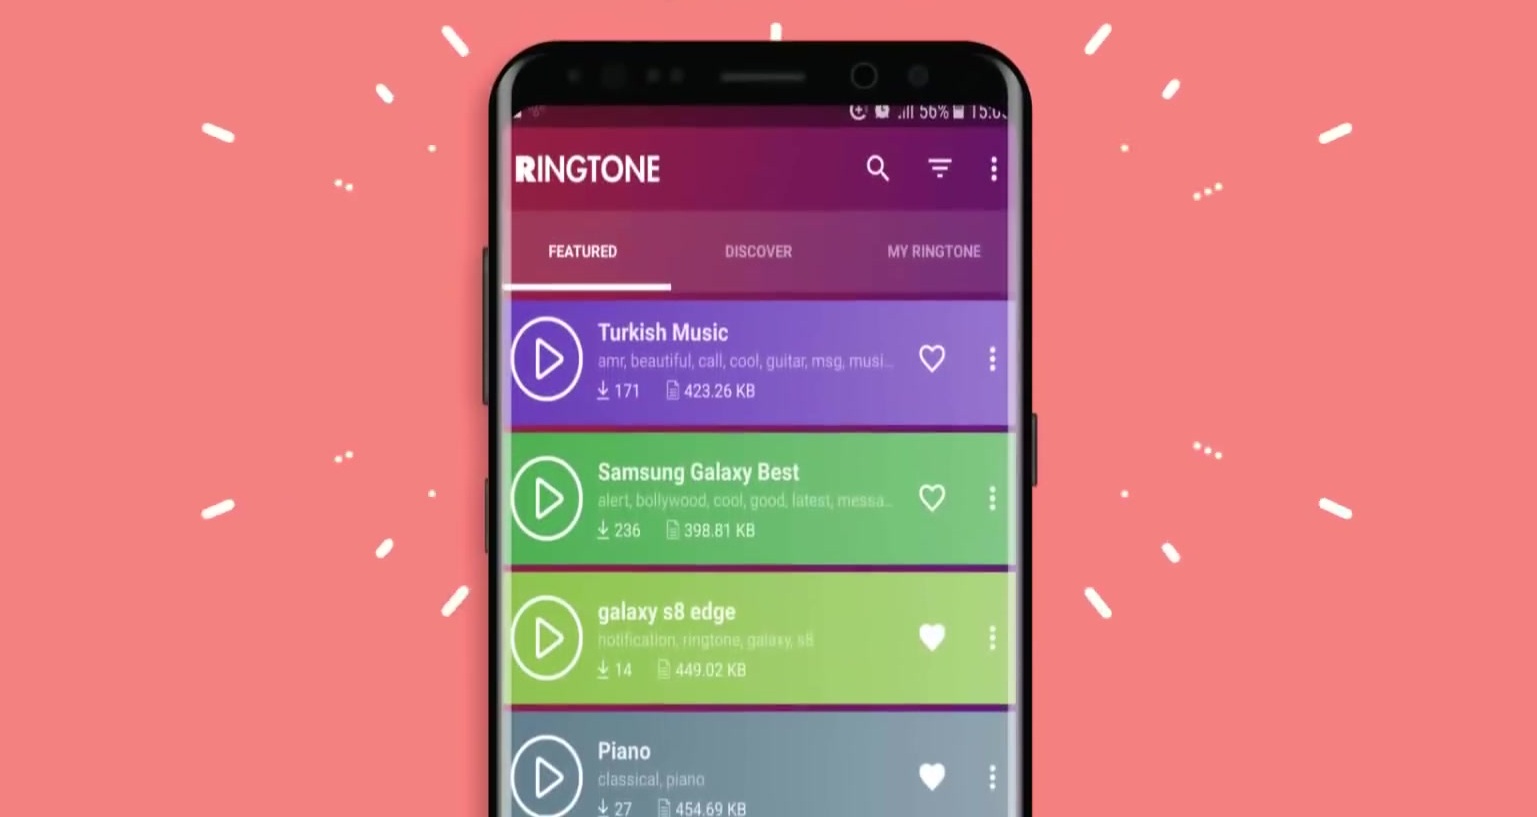 How To Download Ringtone On Android